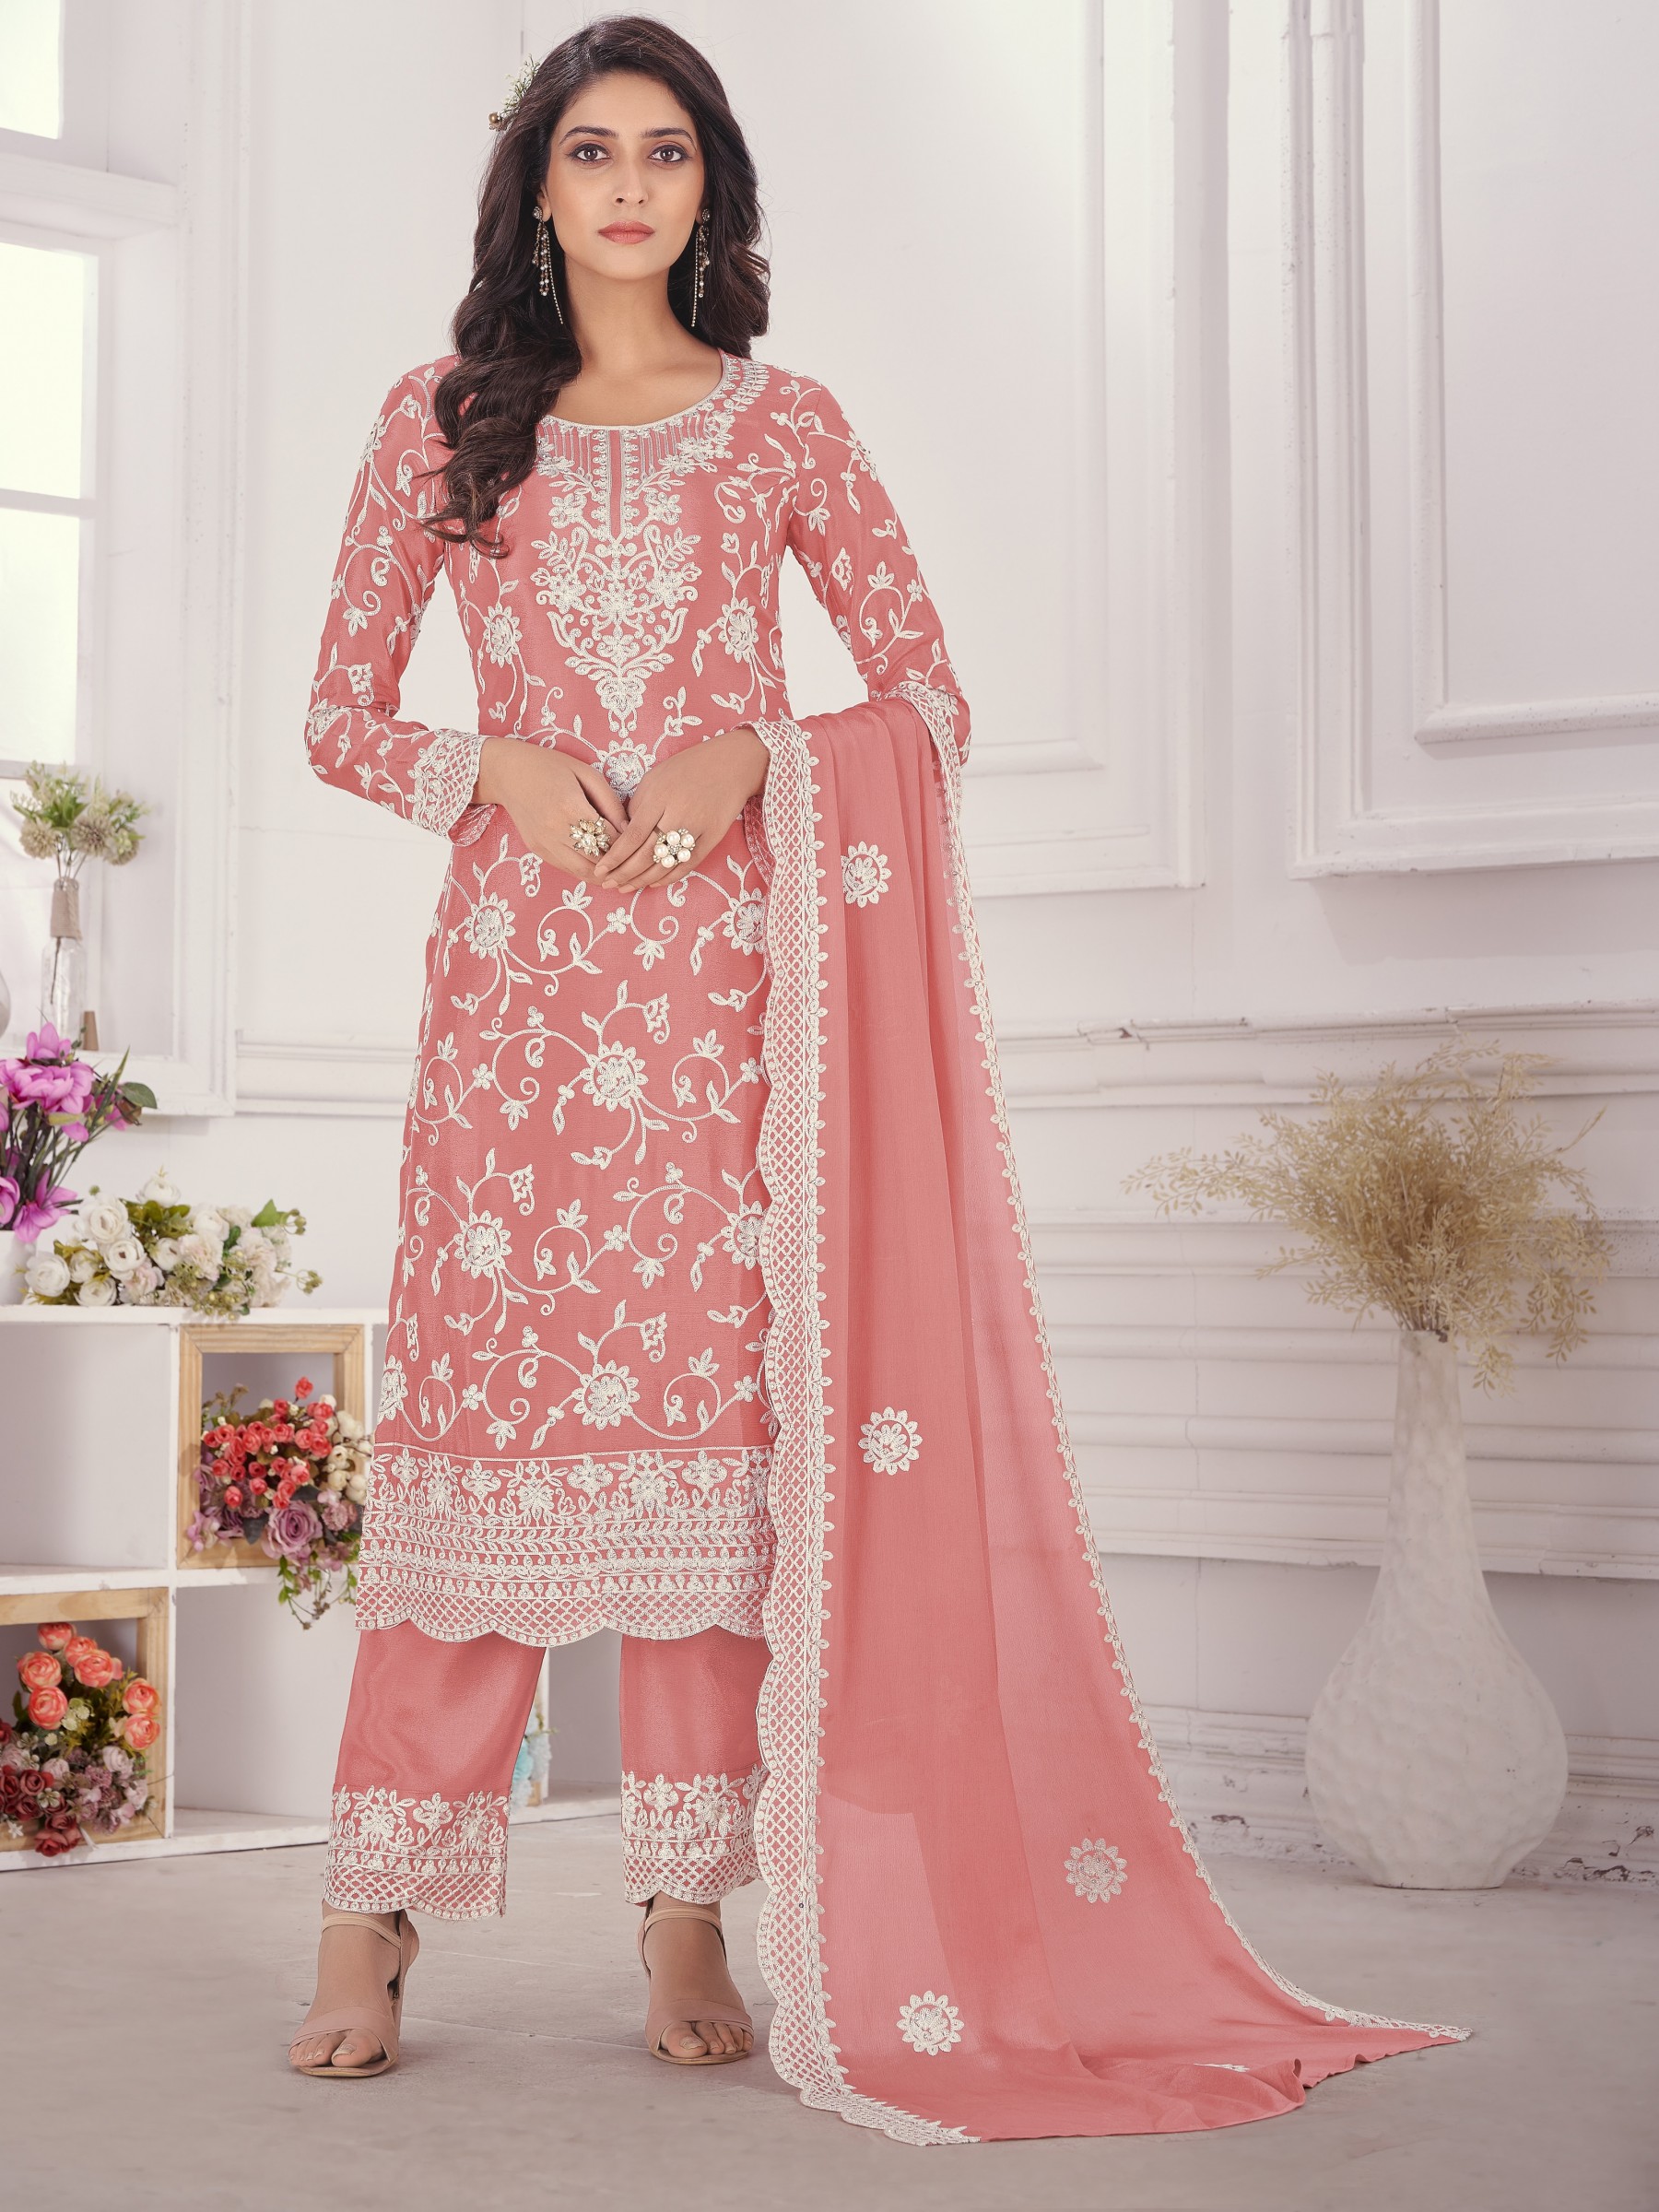 Chinon Fabrics Party Wear Suit In Peach Color With Embroidery Work